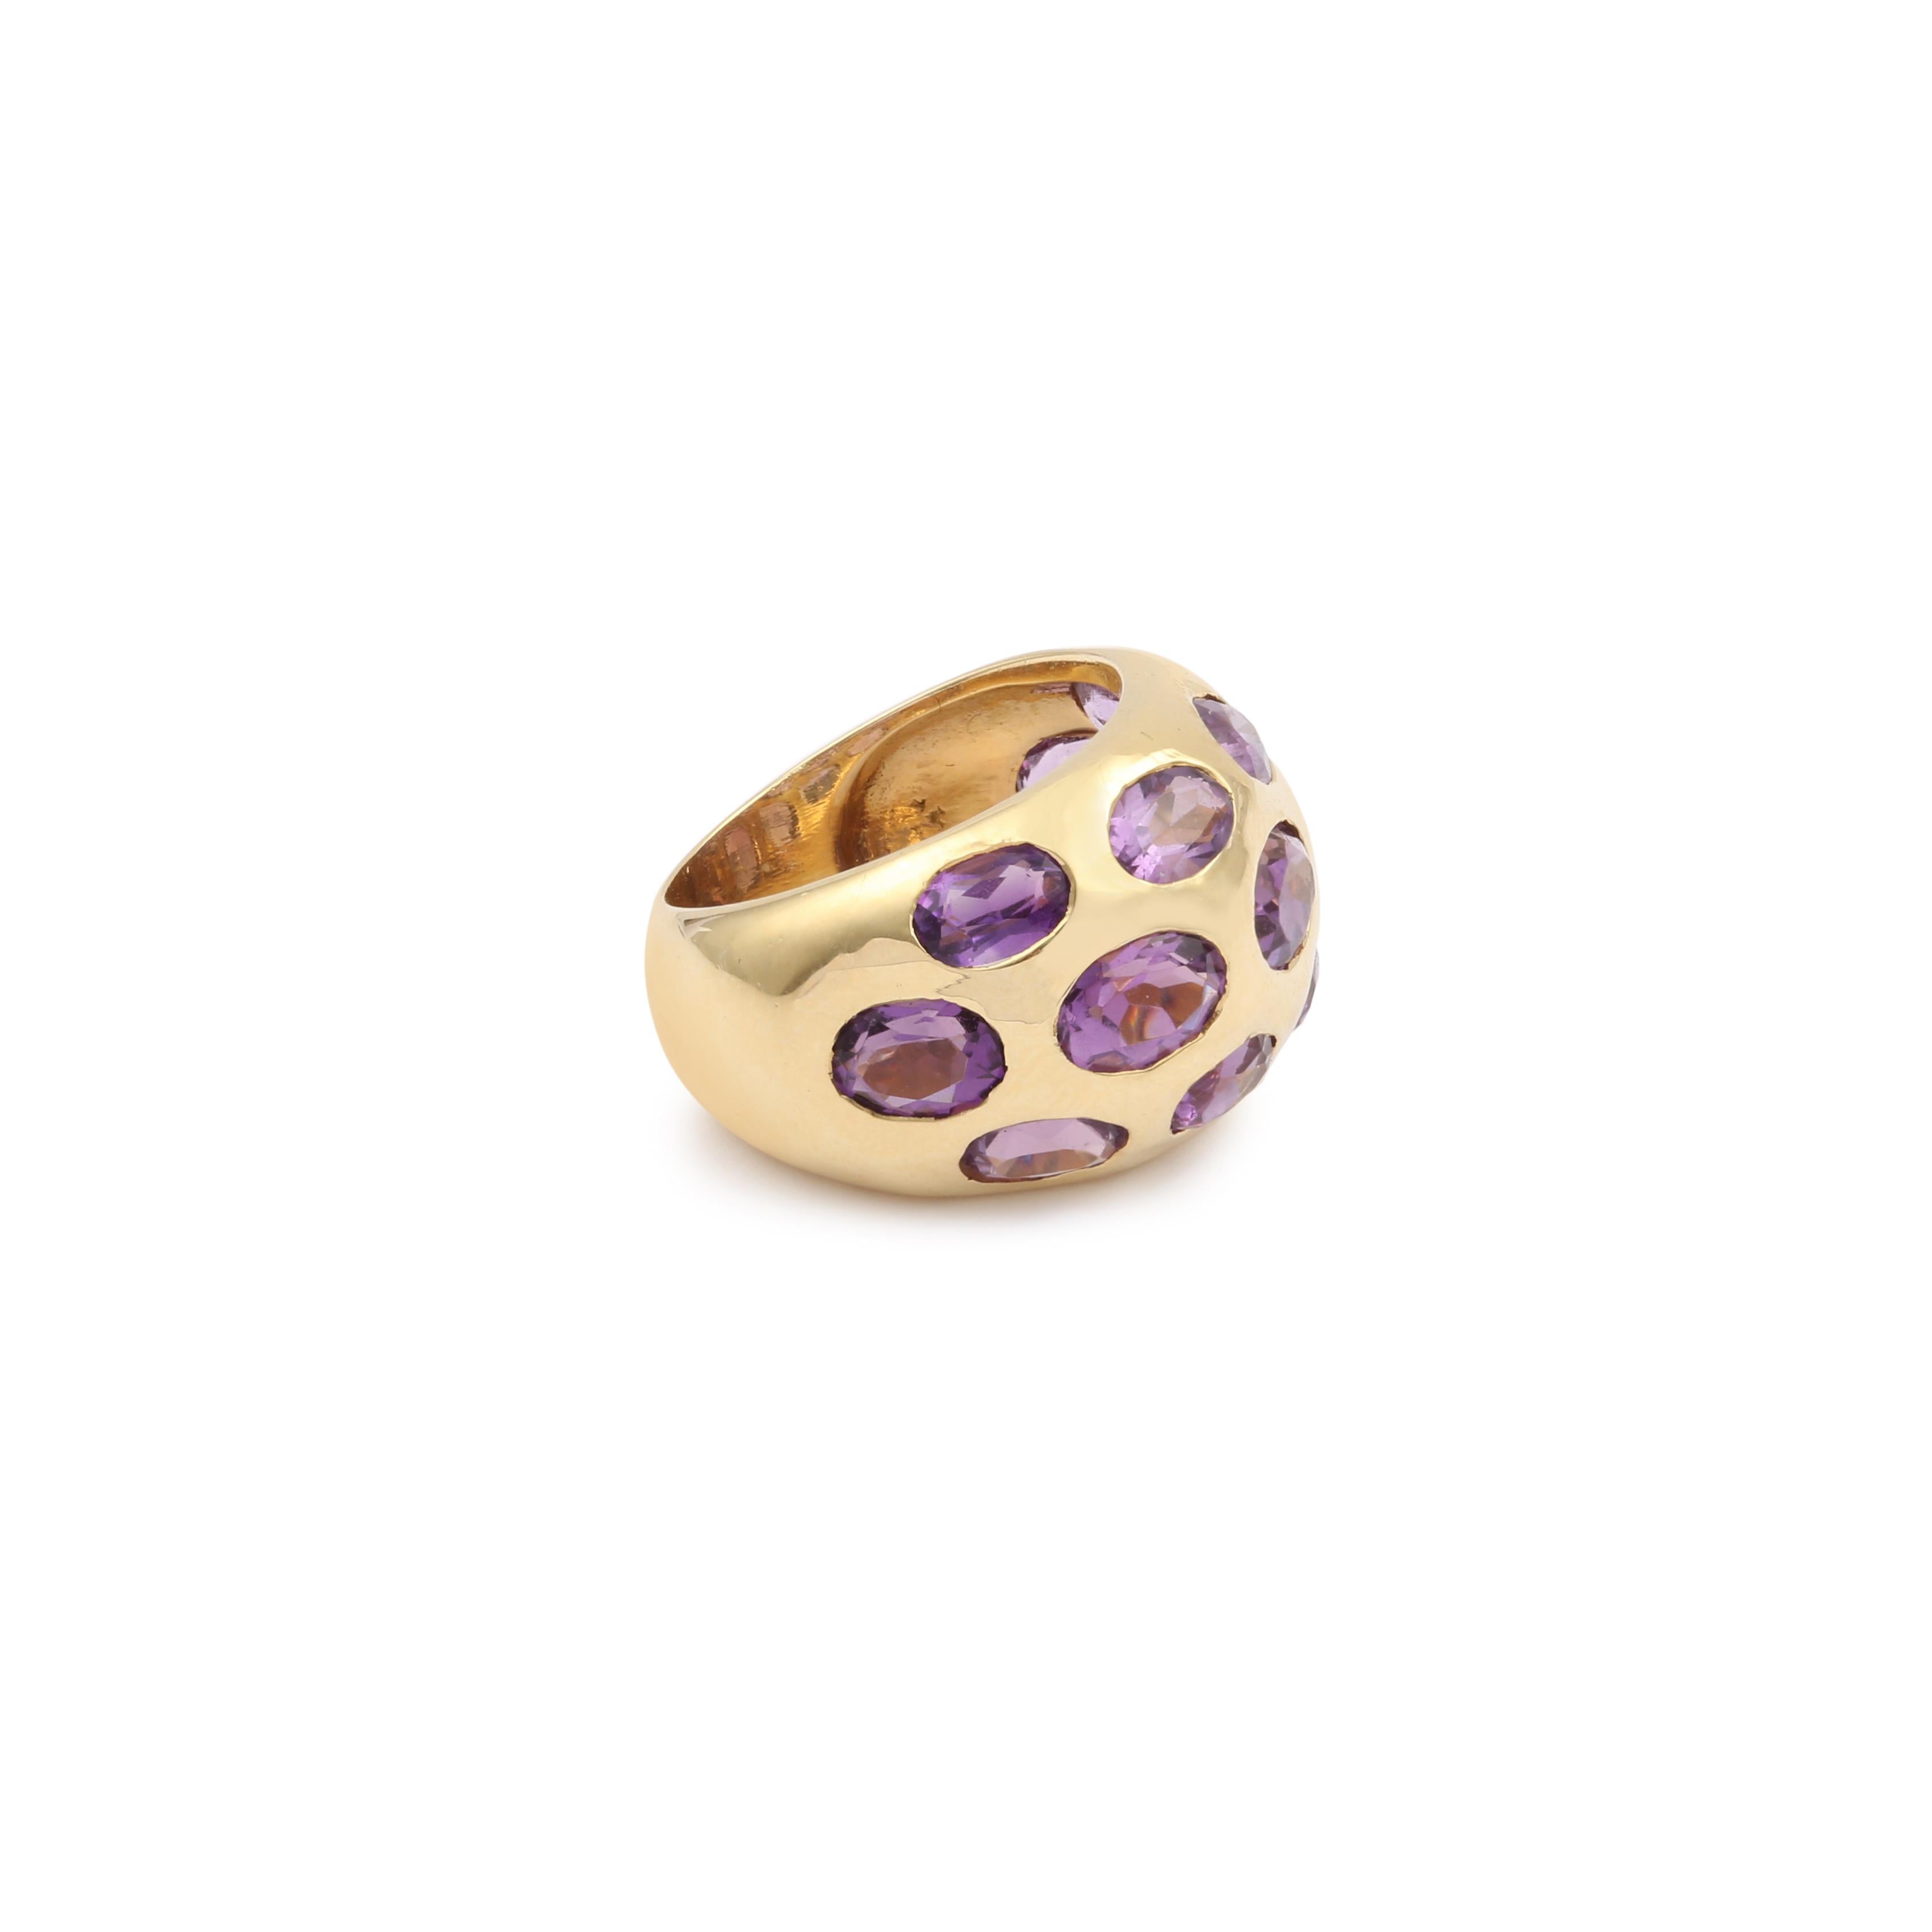 Gold ring set with oval amethysts.

Total estimated weight of amethysts: 6 carats

Dimensions: 15.69 x 24.08 x 5.76 mm (0.617 x 0.948 x 0.226 inch)

Finger size : 56 (US : 7.5)

Ring weight : 14.2 g

French work circa 1970-1980

18K yellow gold,